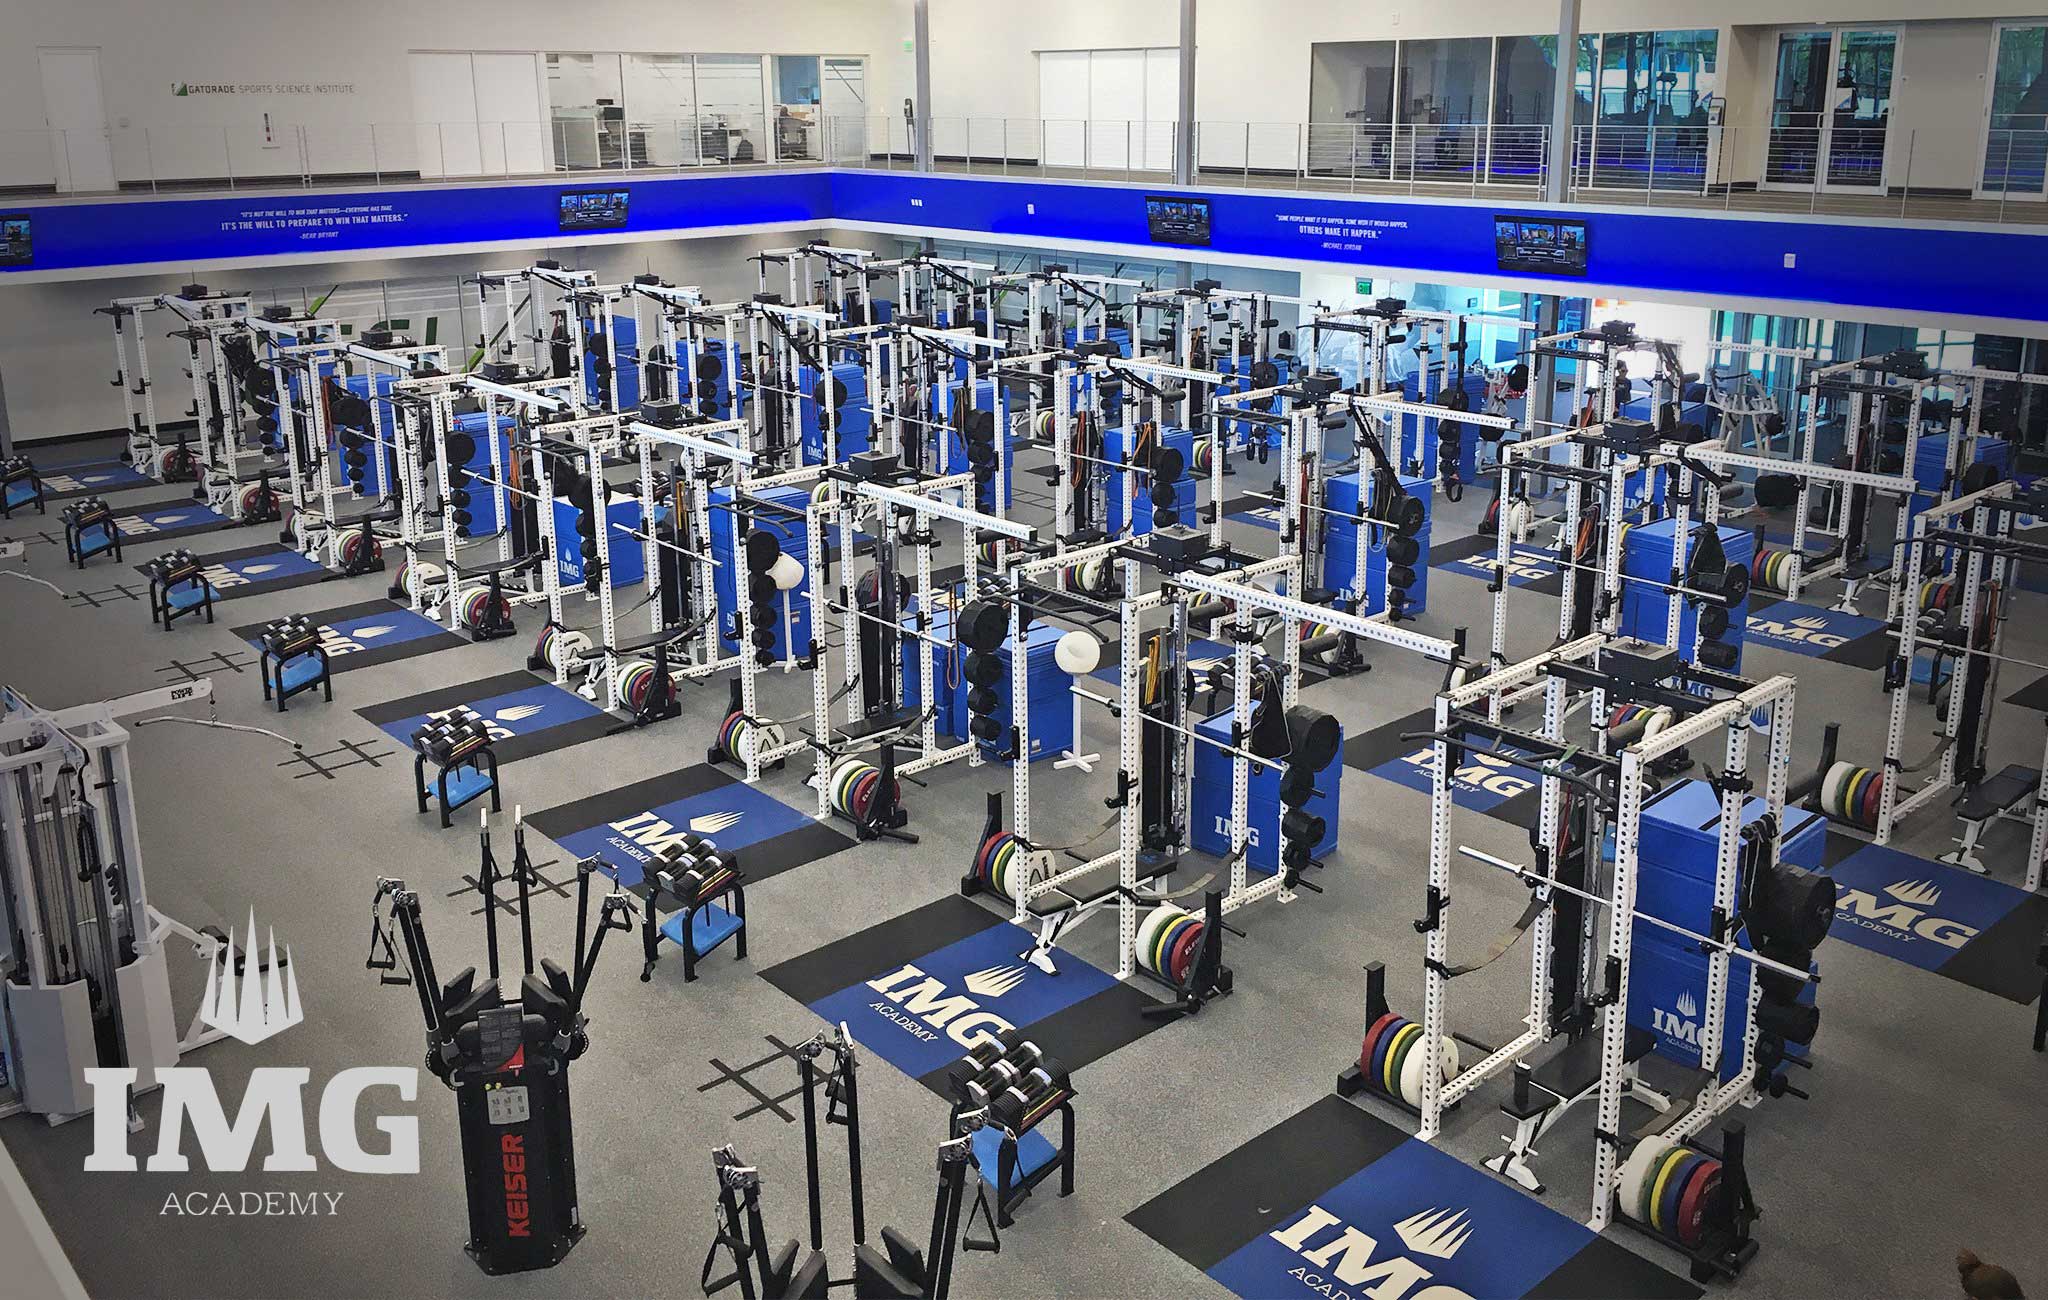 IMG Academy Sorinex strength and conditioning facility